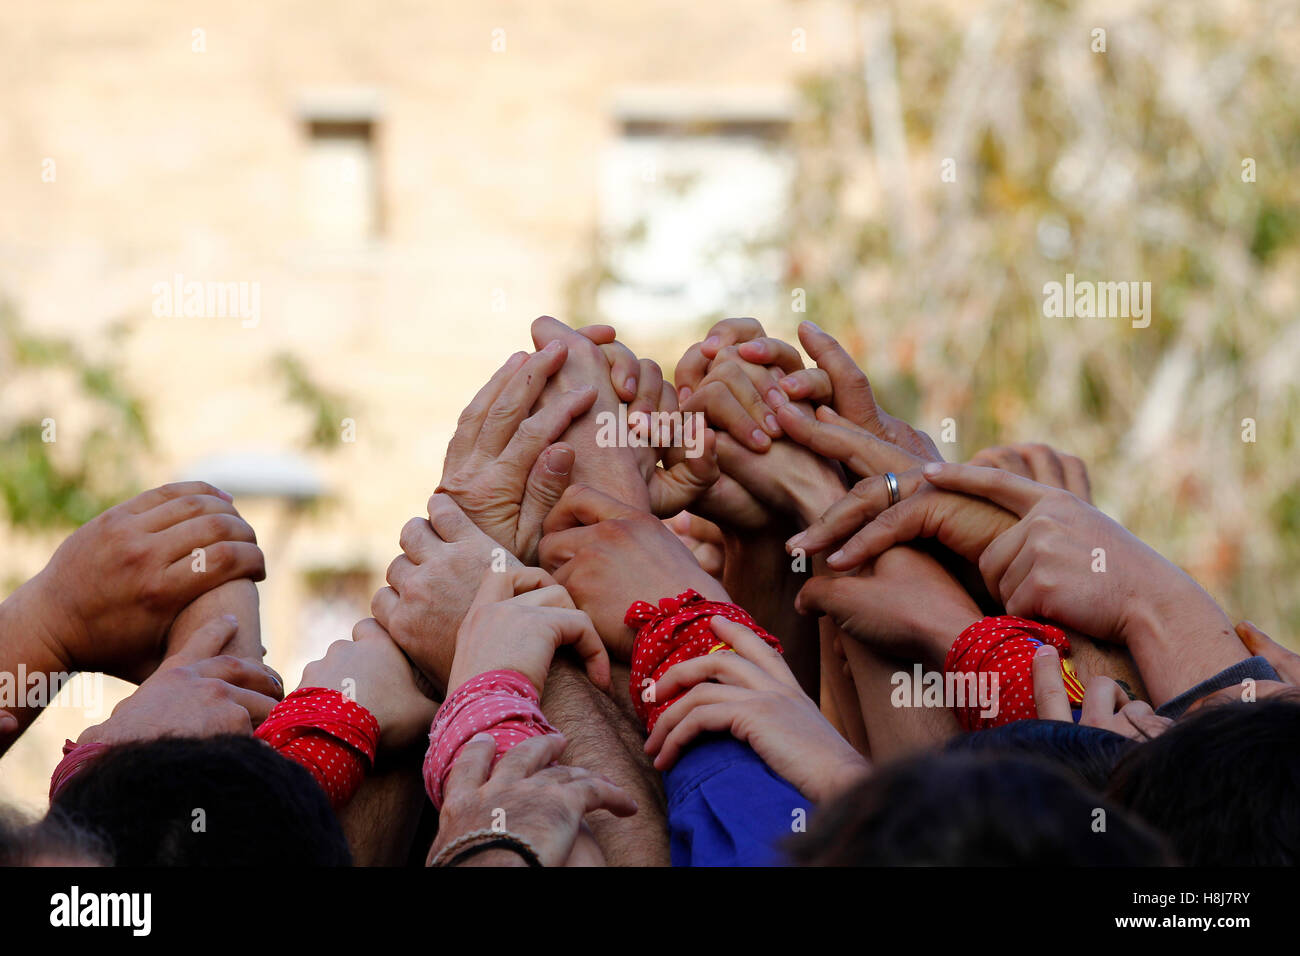 Group of people with hands up together, Catellers teamwork Stock Photo